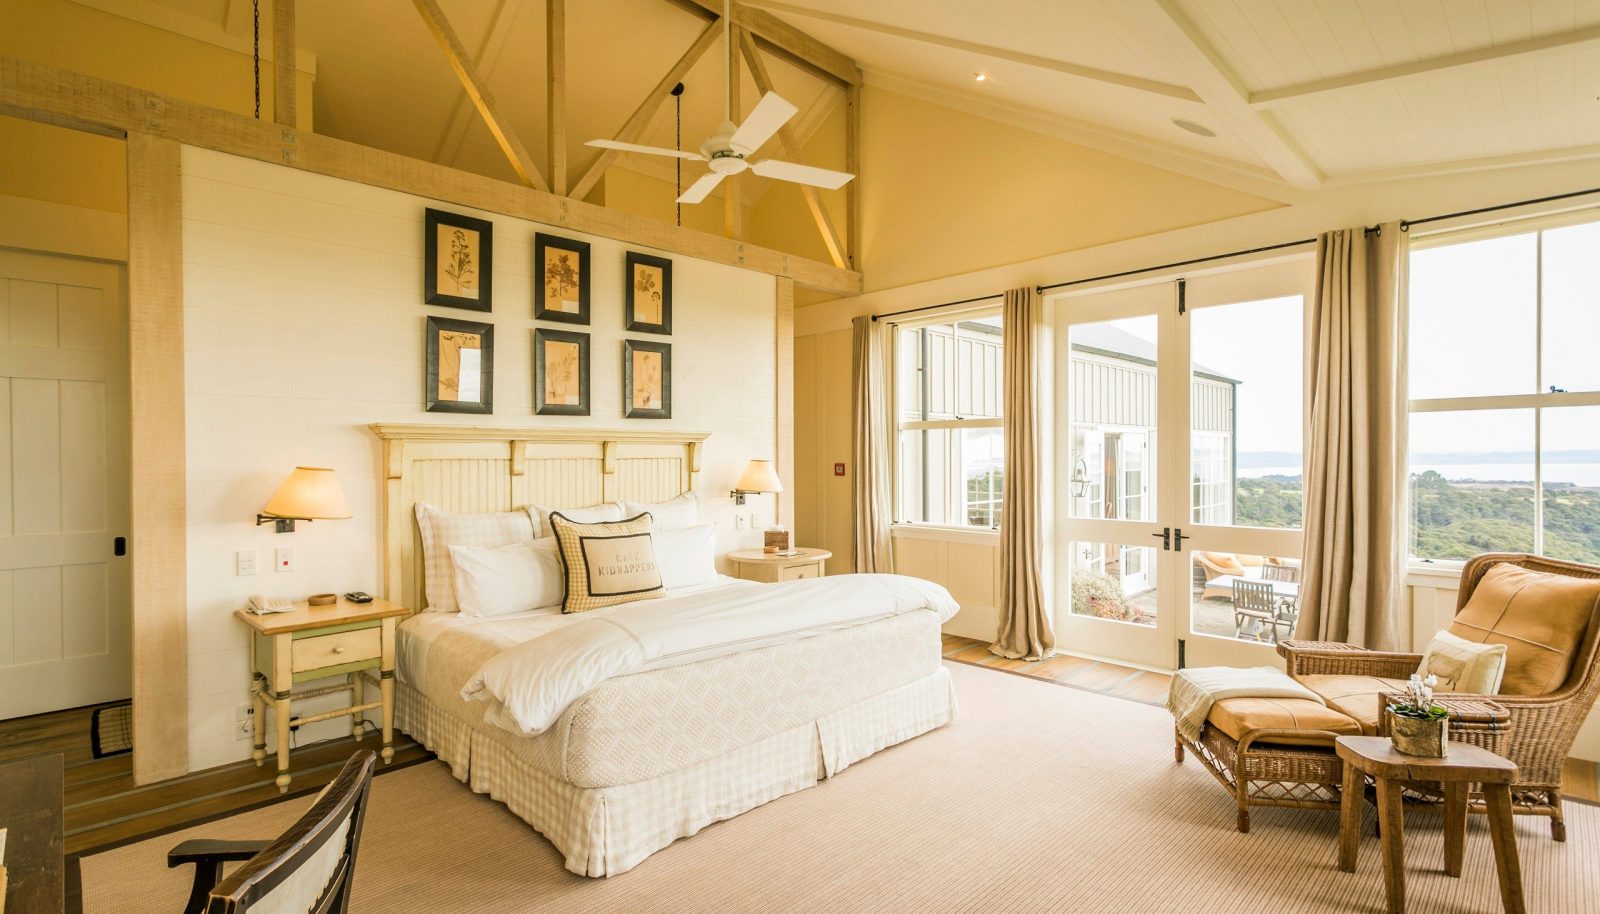 The Owner's Cottage bedroom at The Farm at Cape Kidnappers